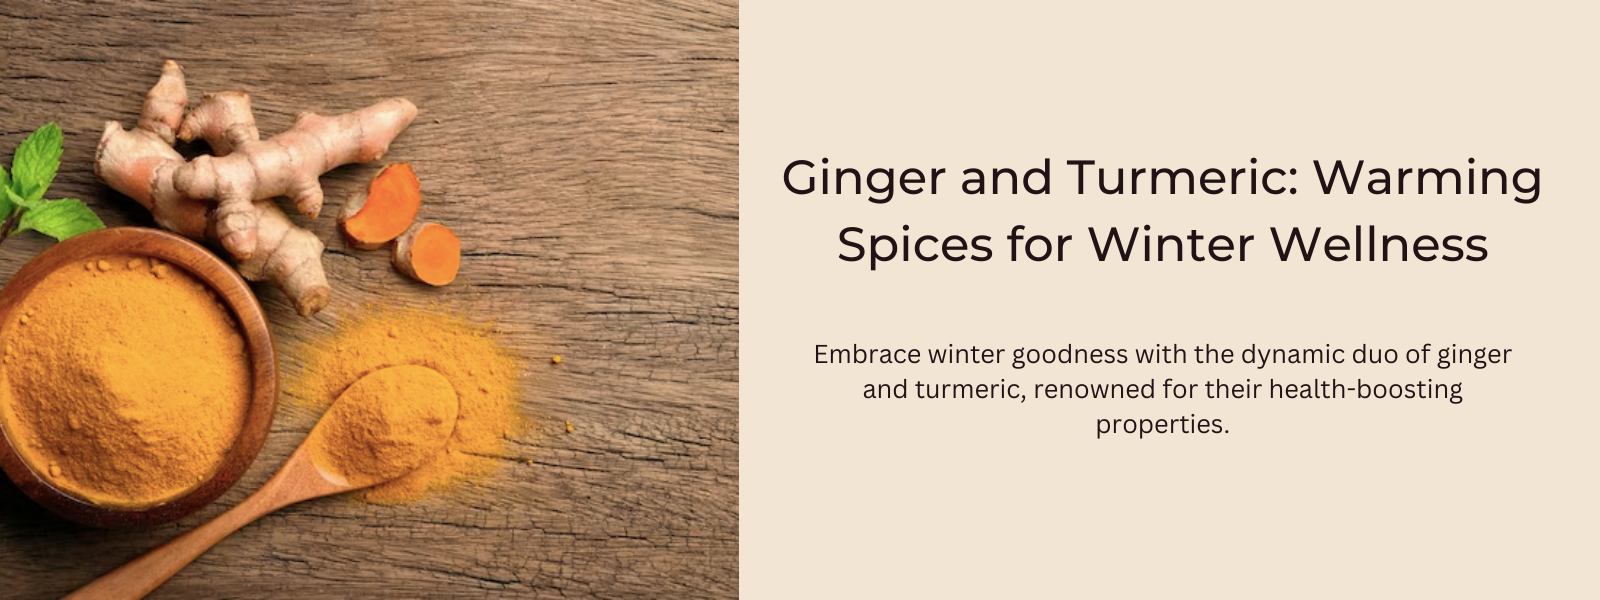 Ginger and Turmeric: Warming Spices for Winter Wellness